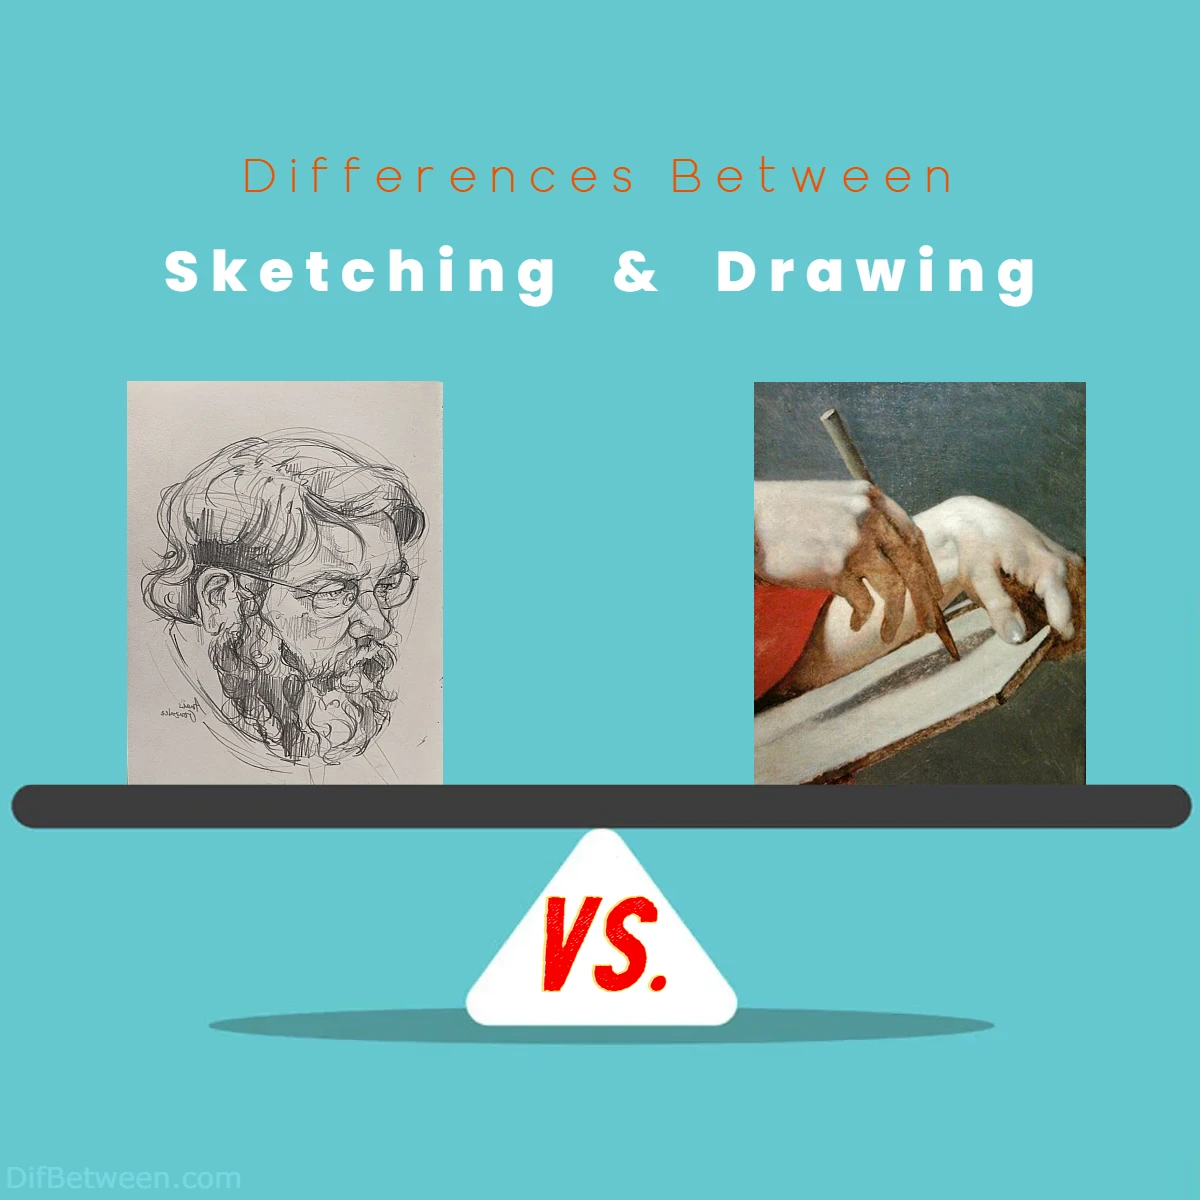 Differences Between Sketching vs Drawing